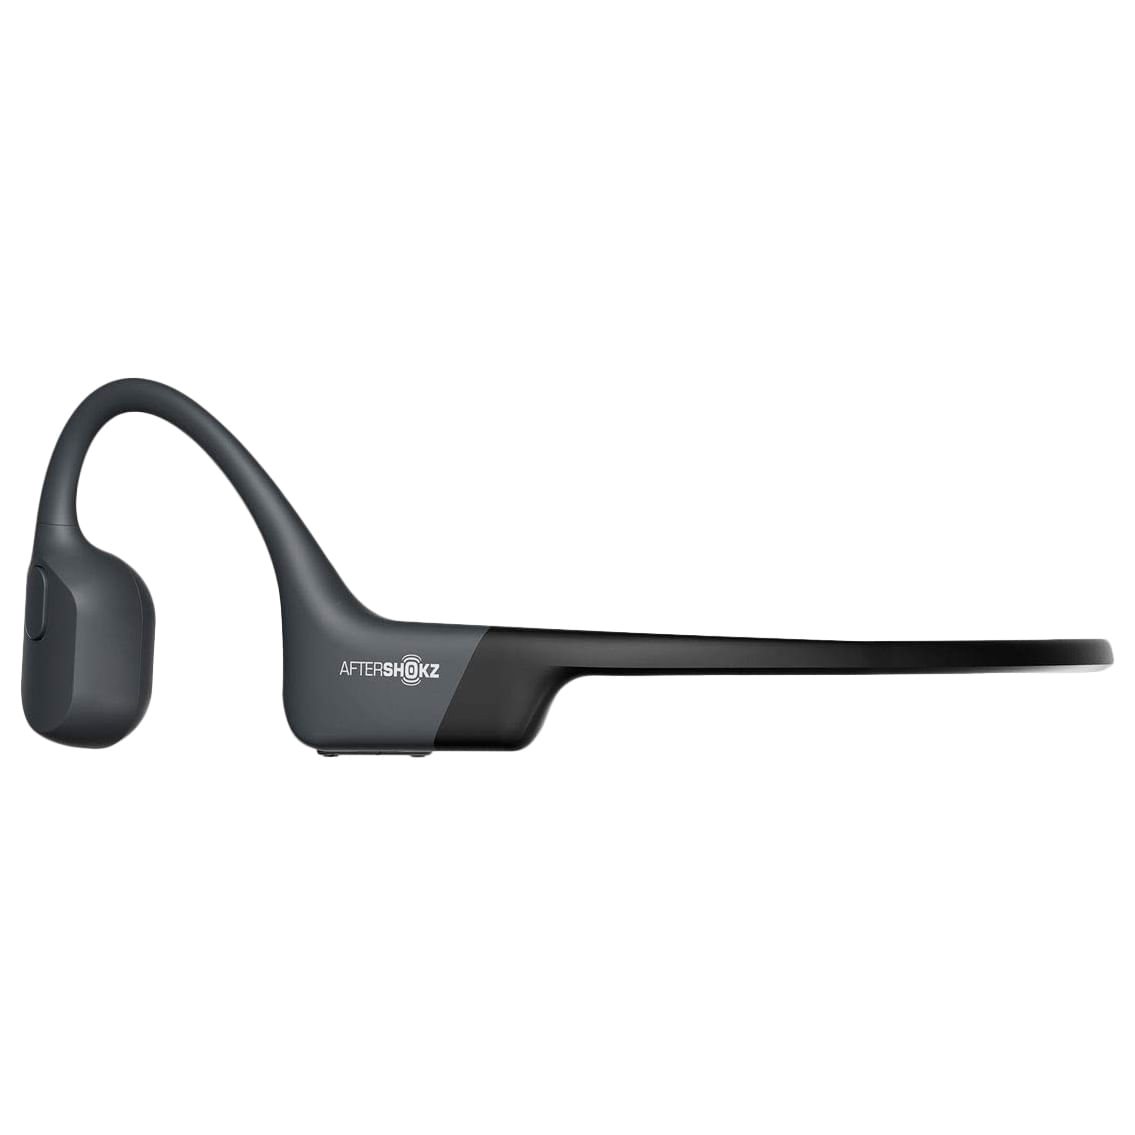 Aftershokz AEROPEX COSMIC BLACK BLACK - Ski Jackets and Gear, Winter Coats,  Running, Tennis, Soccer, and more from Top Brands - Paragon Sports